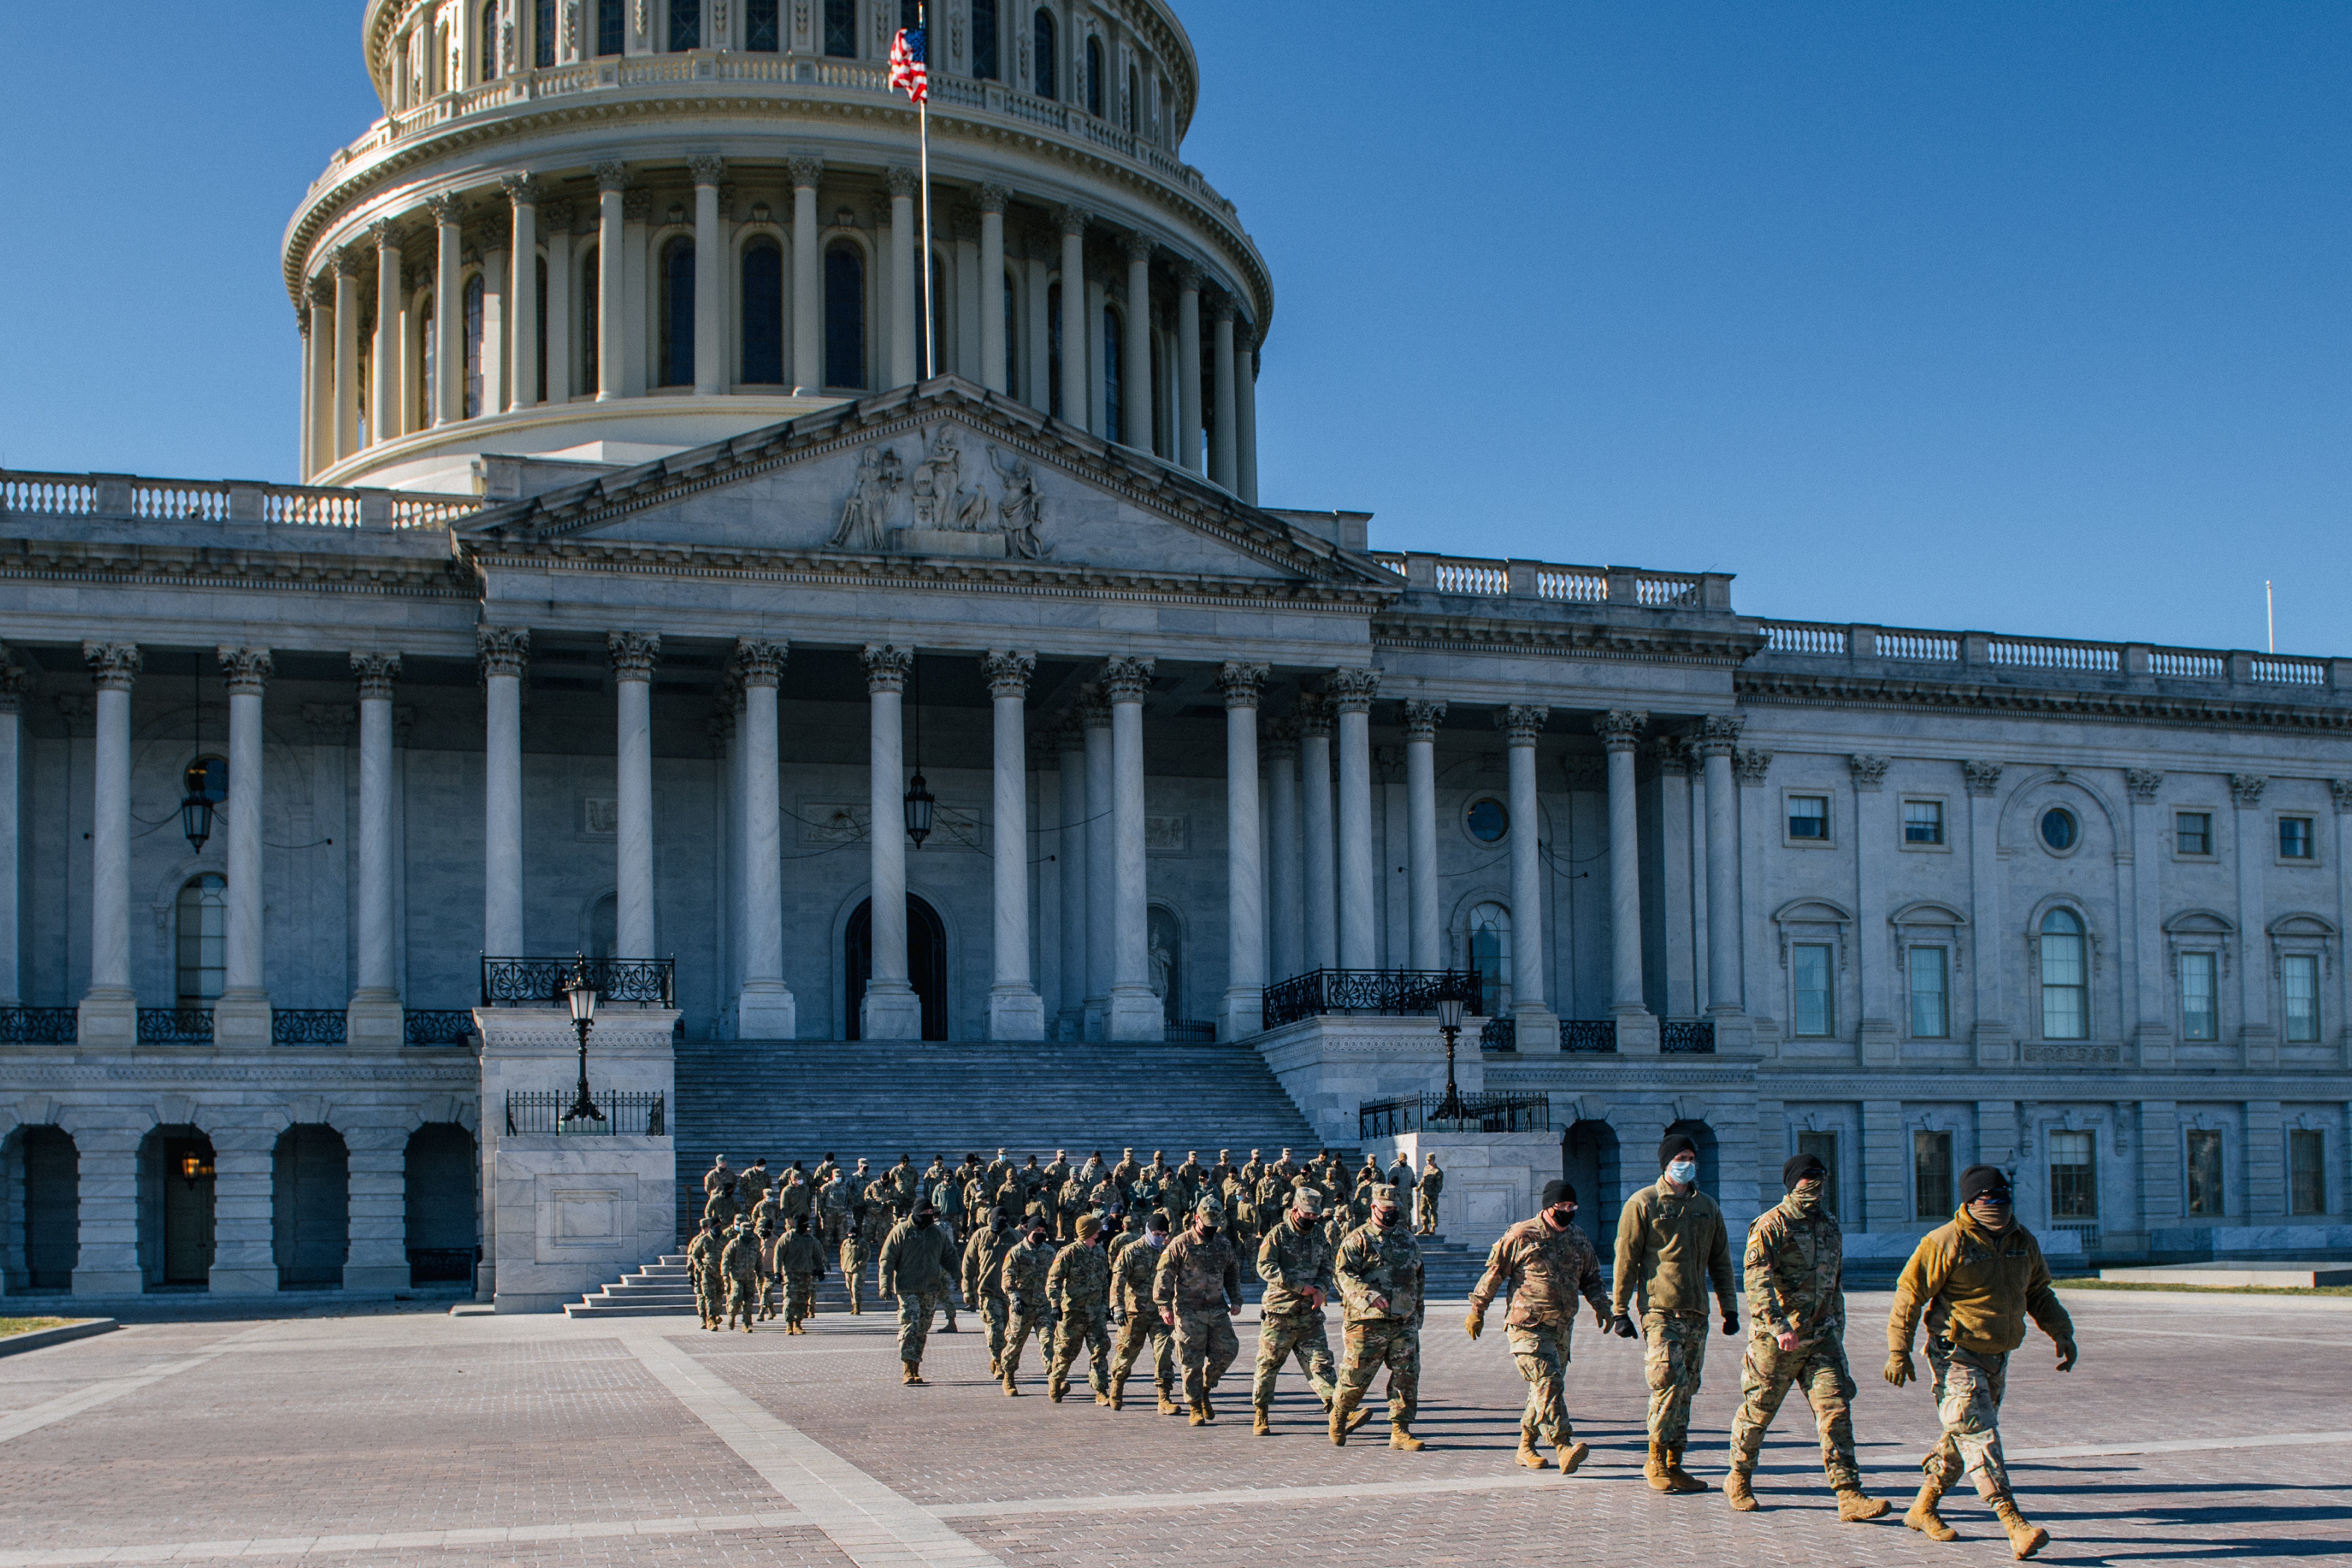 File Image: National Guard Citizen-soldiers exit after a U.S. Capitol tour on 23 January 2021 in Washington, DC